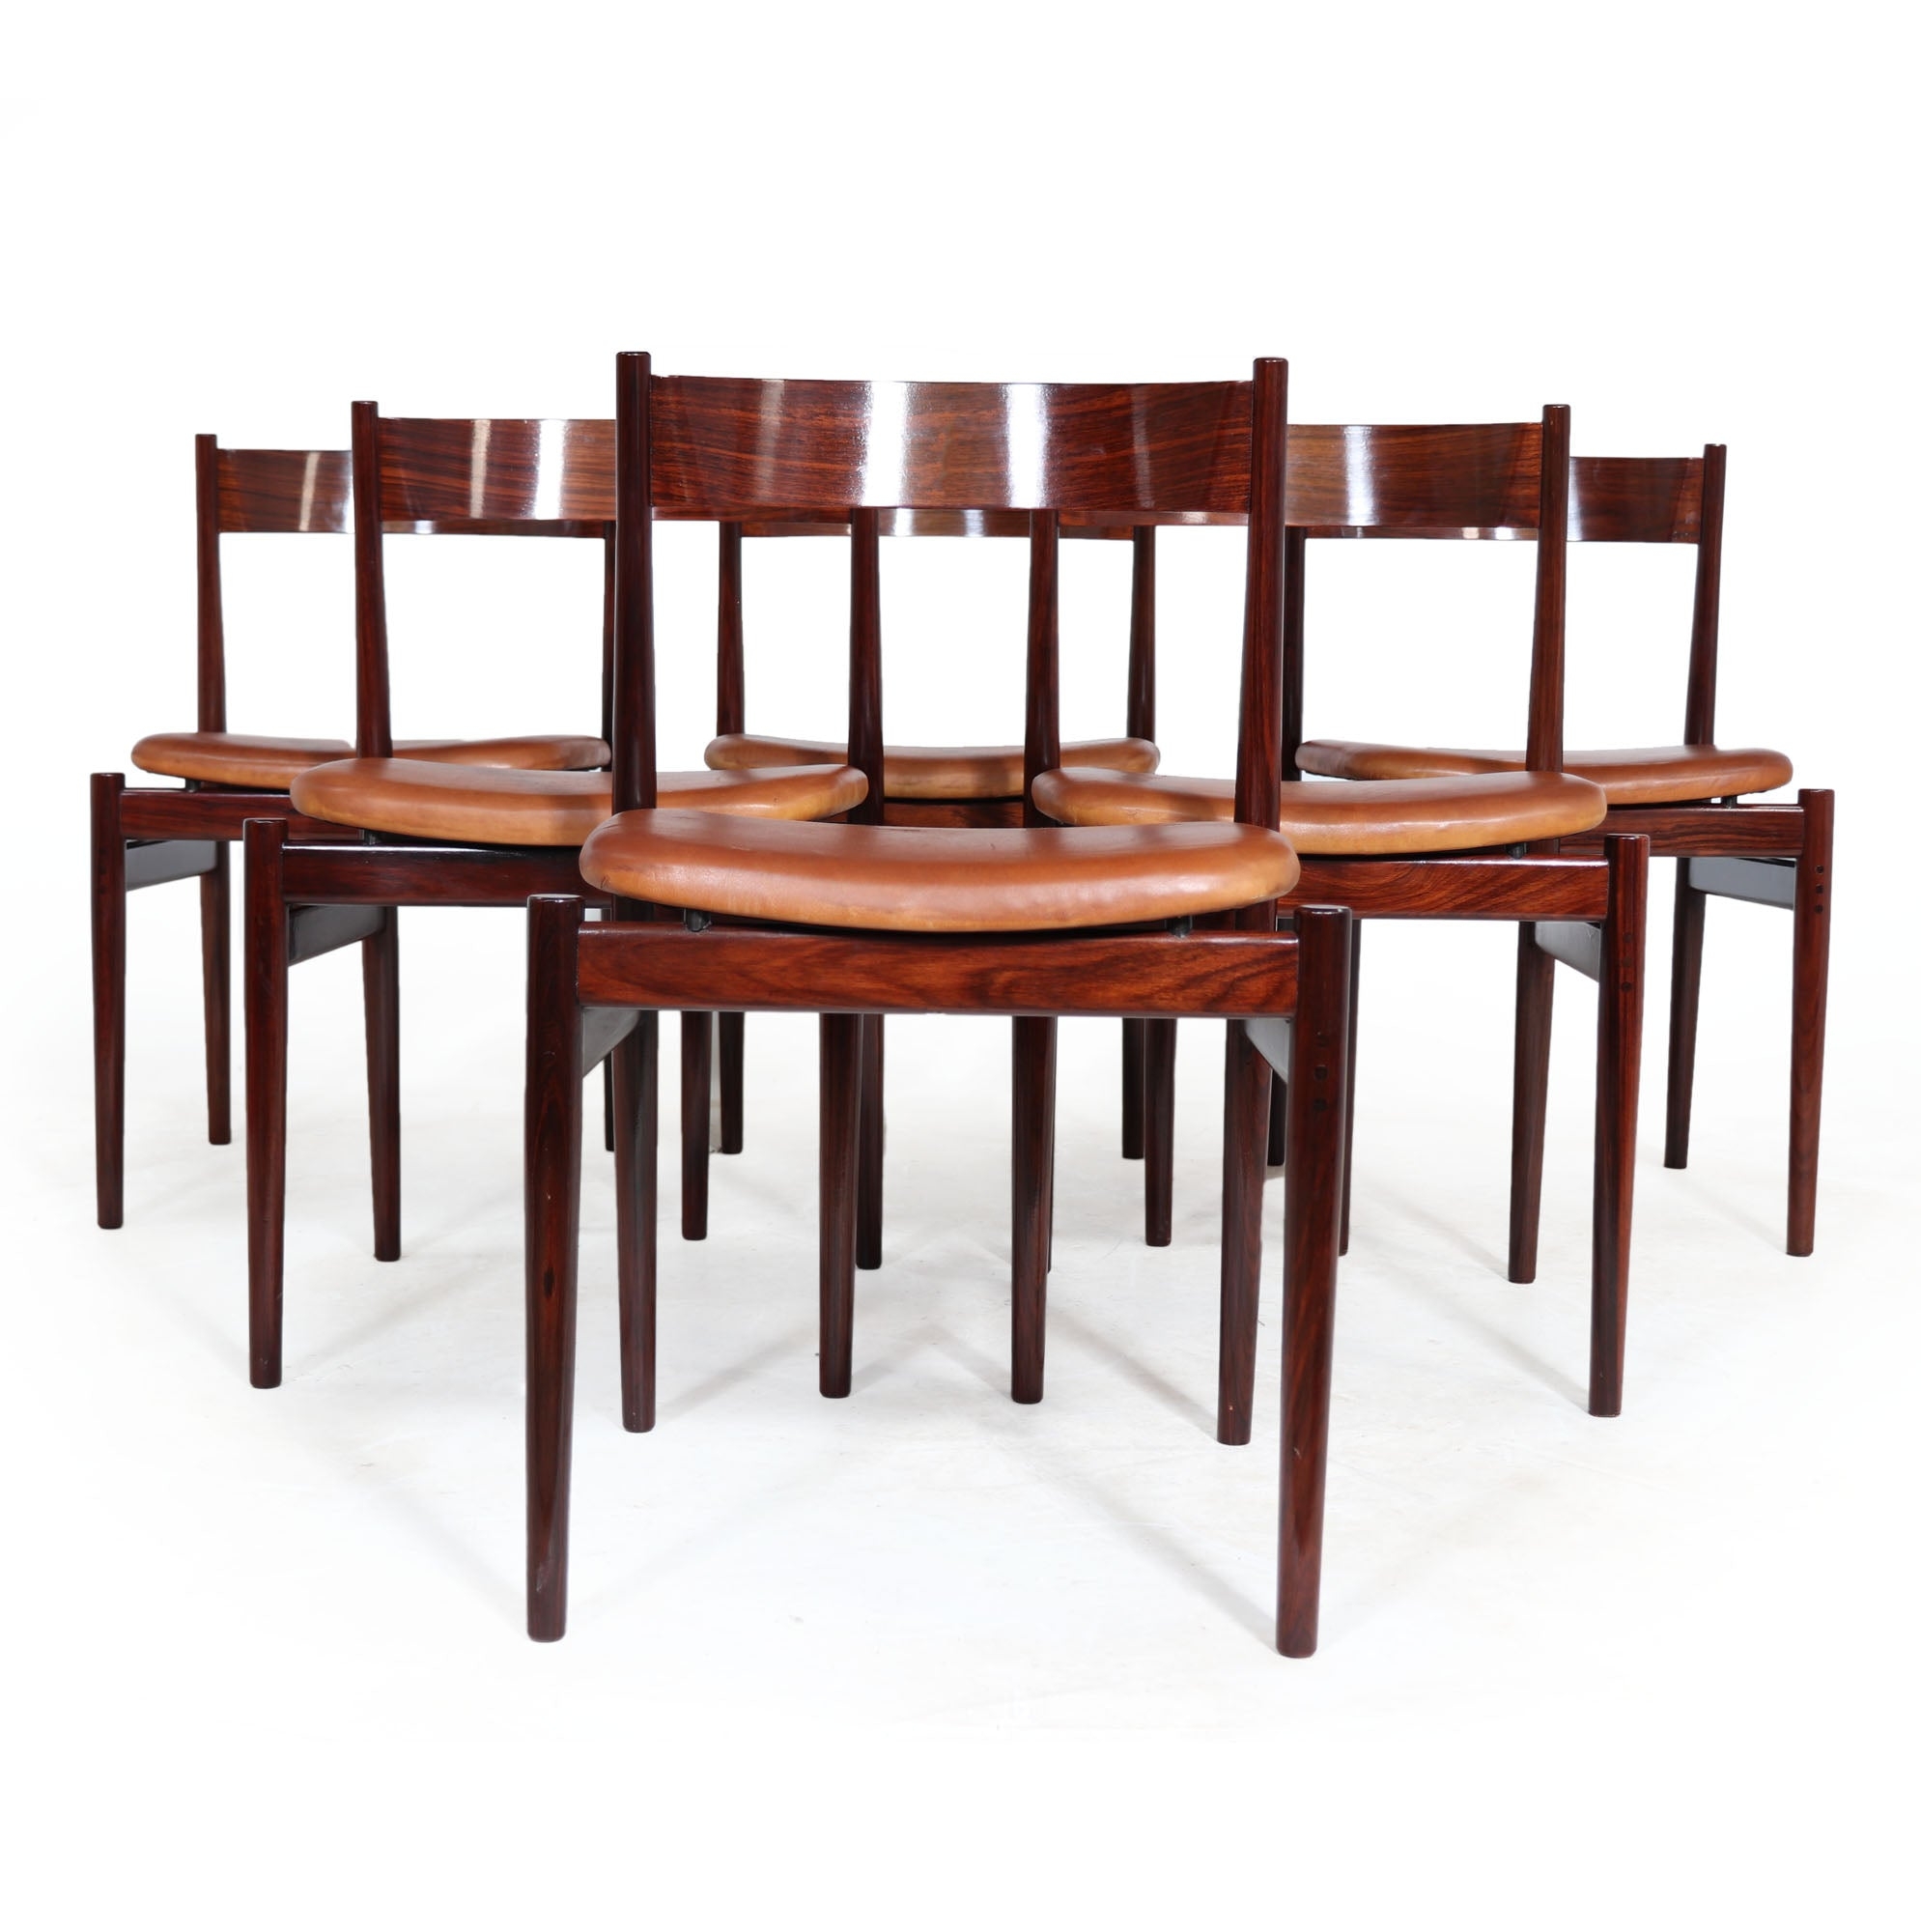 Set of Six Italian Rosewood Dining Chairs by Frattini – The Furniture Rooms